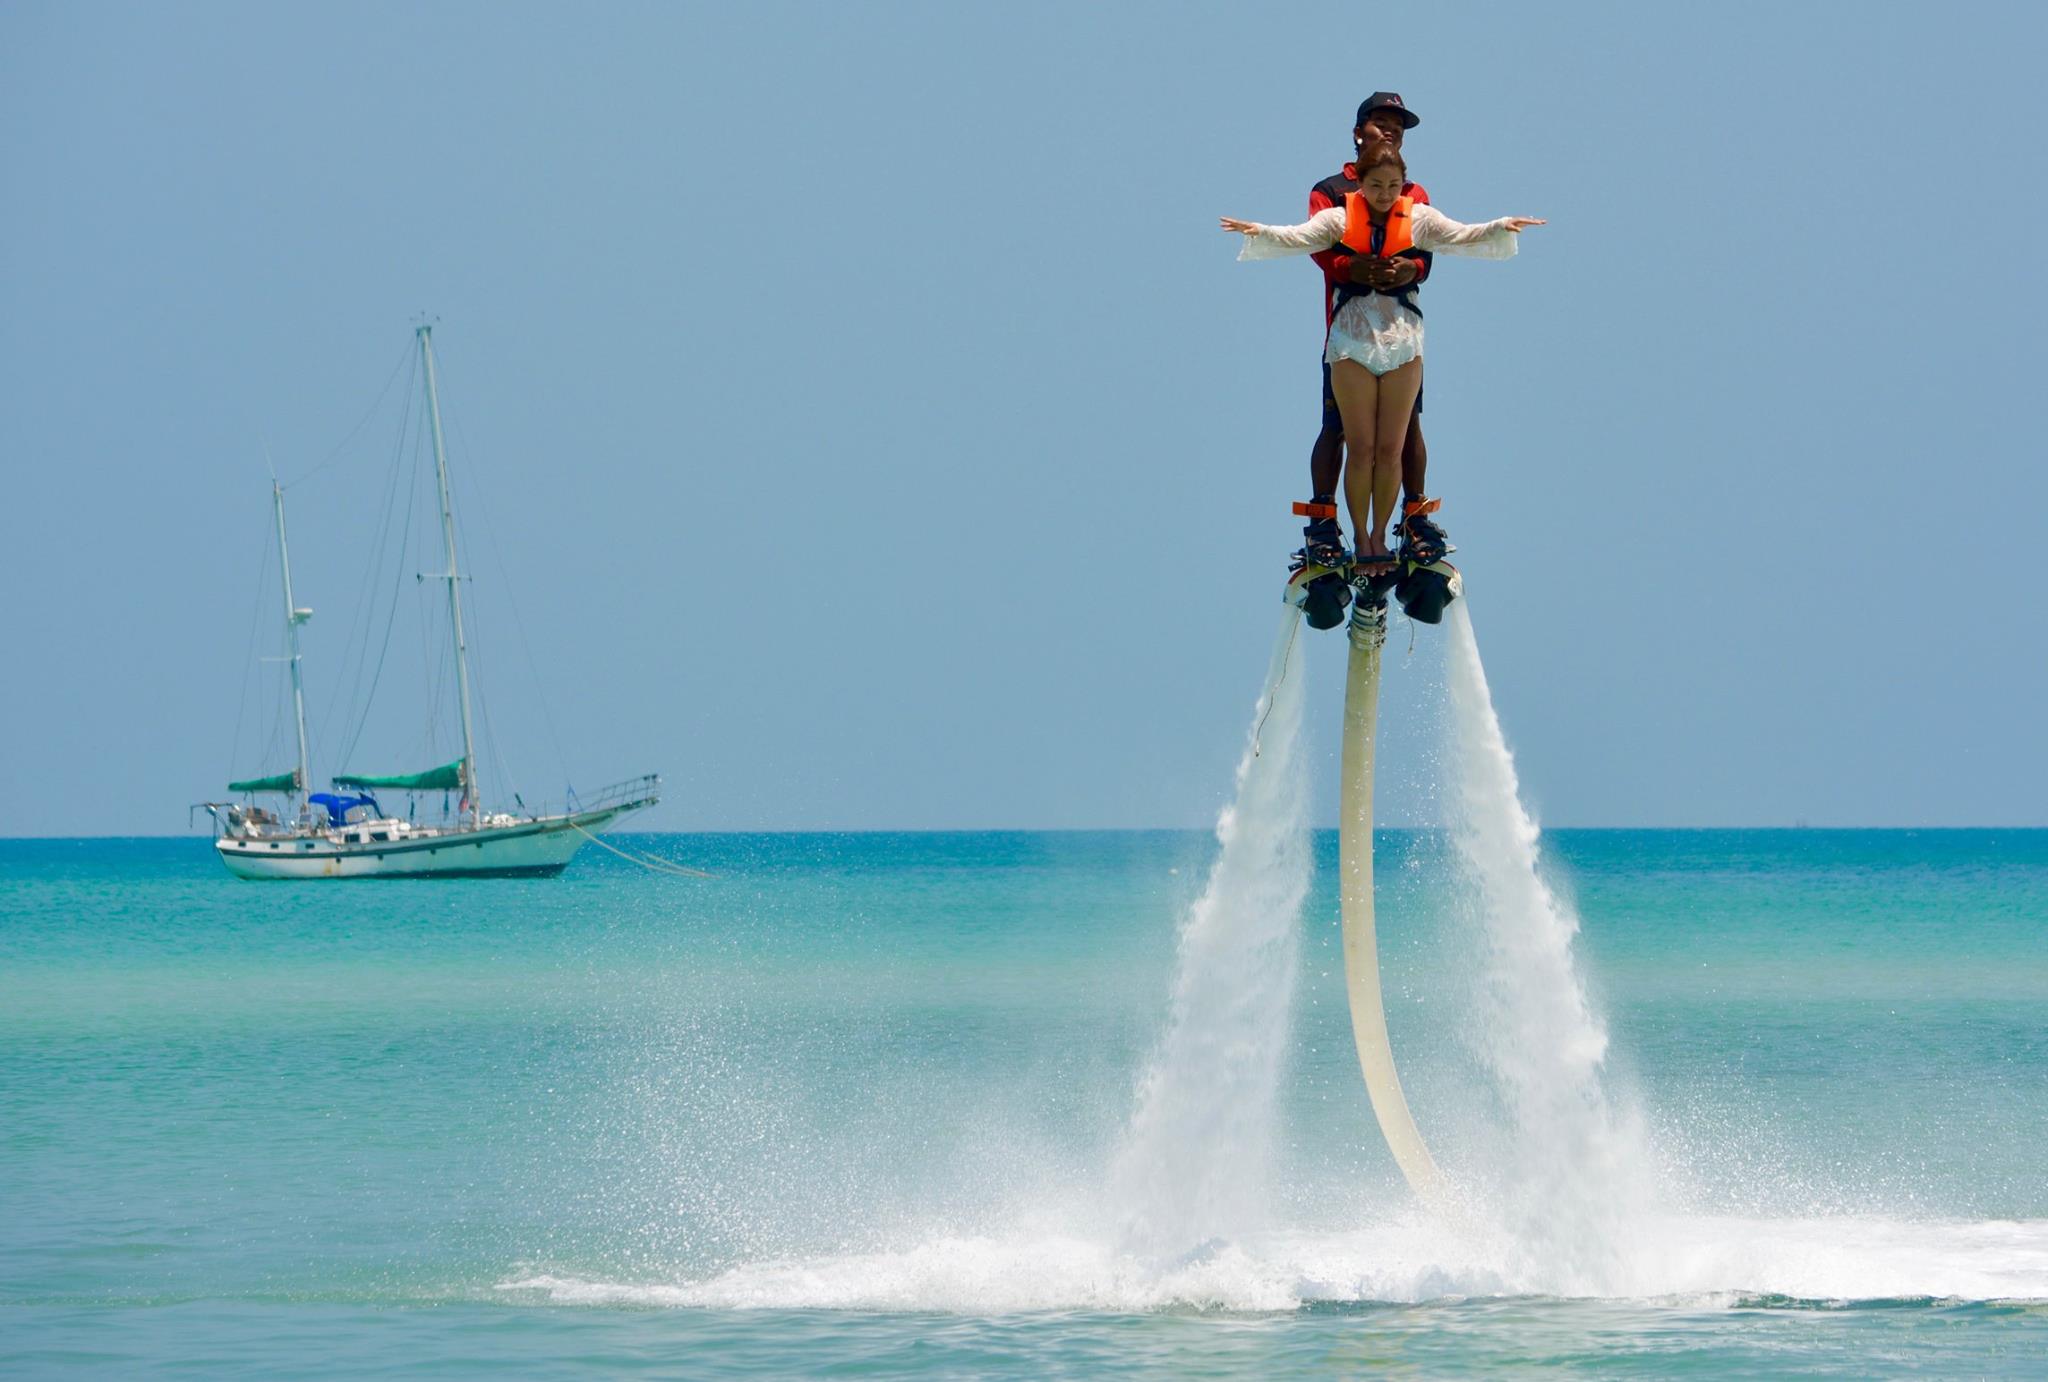 Package of Water Sports – Smile Samui Tour